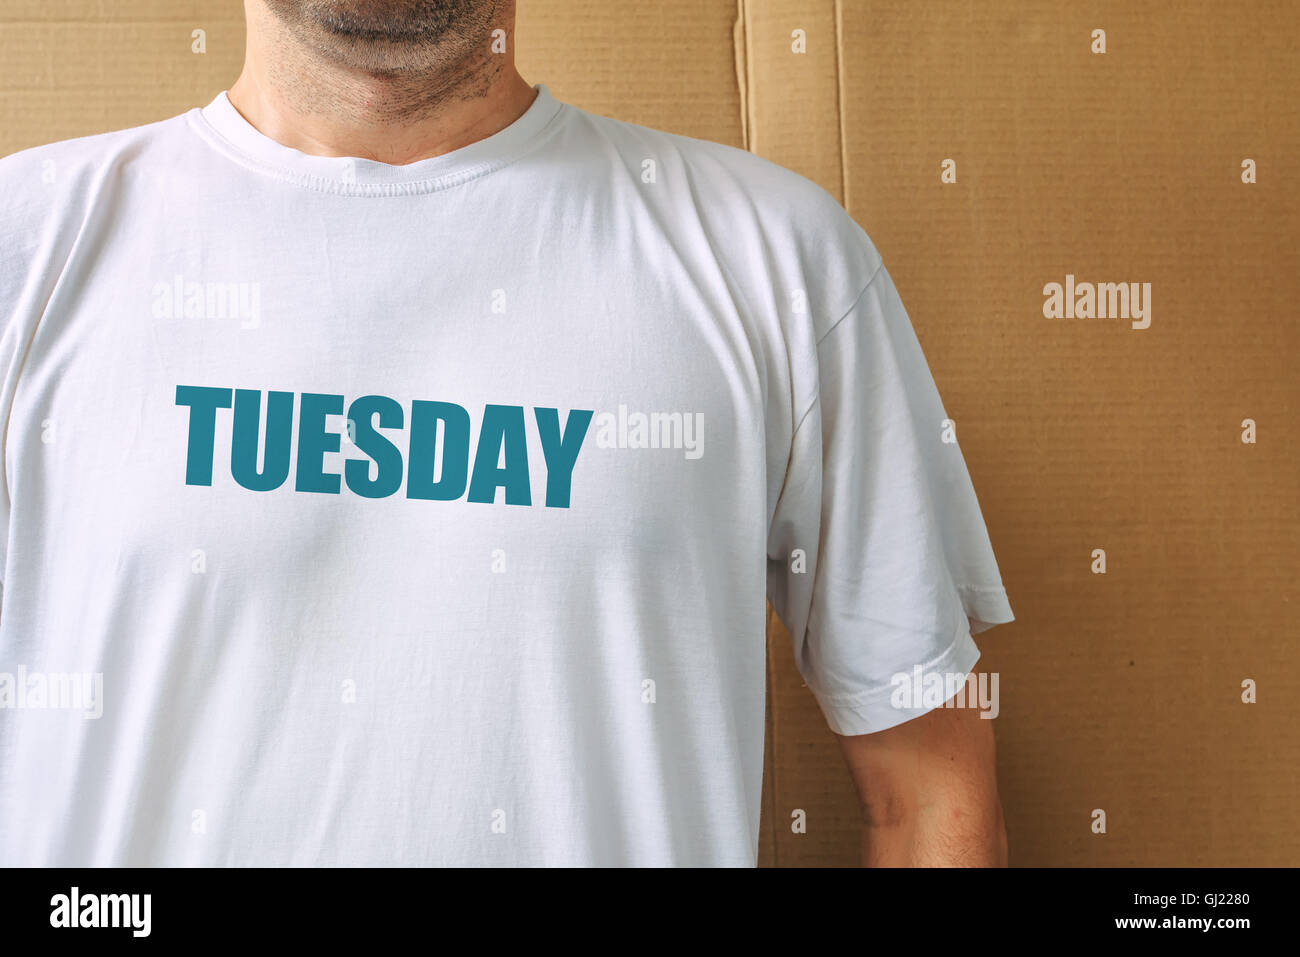 Days of the week - tuesday, man wearing white t-shirt with name of the second weekday printed Stock Photo